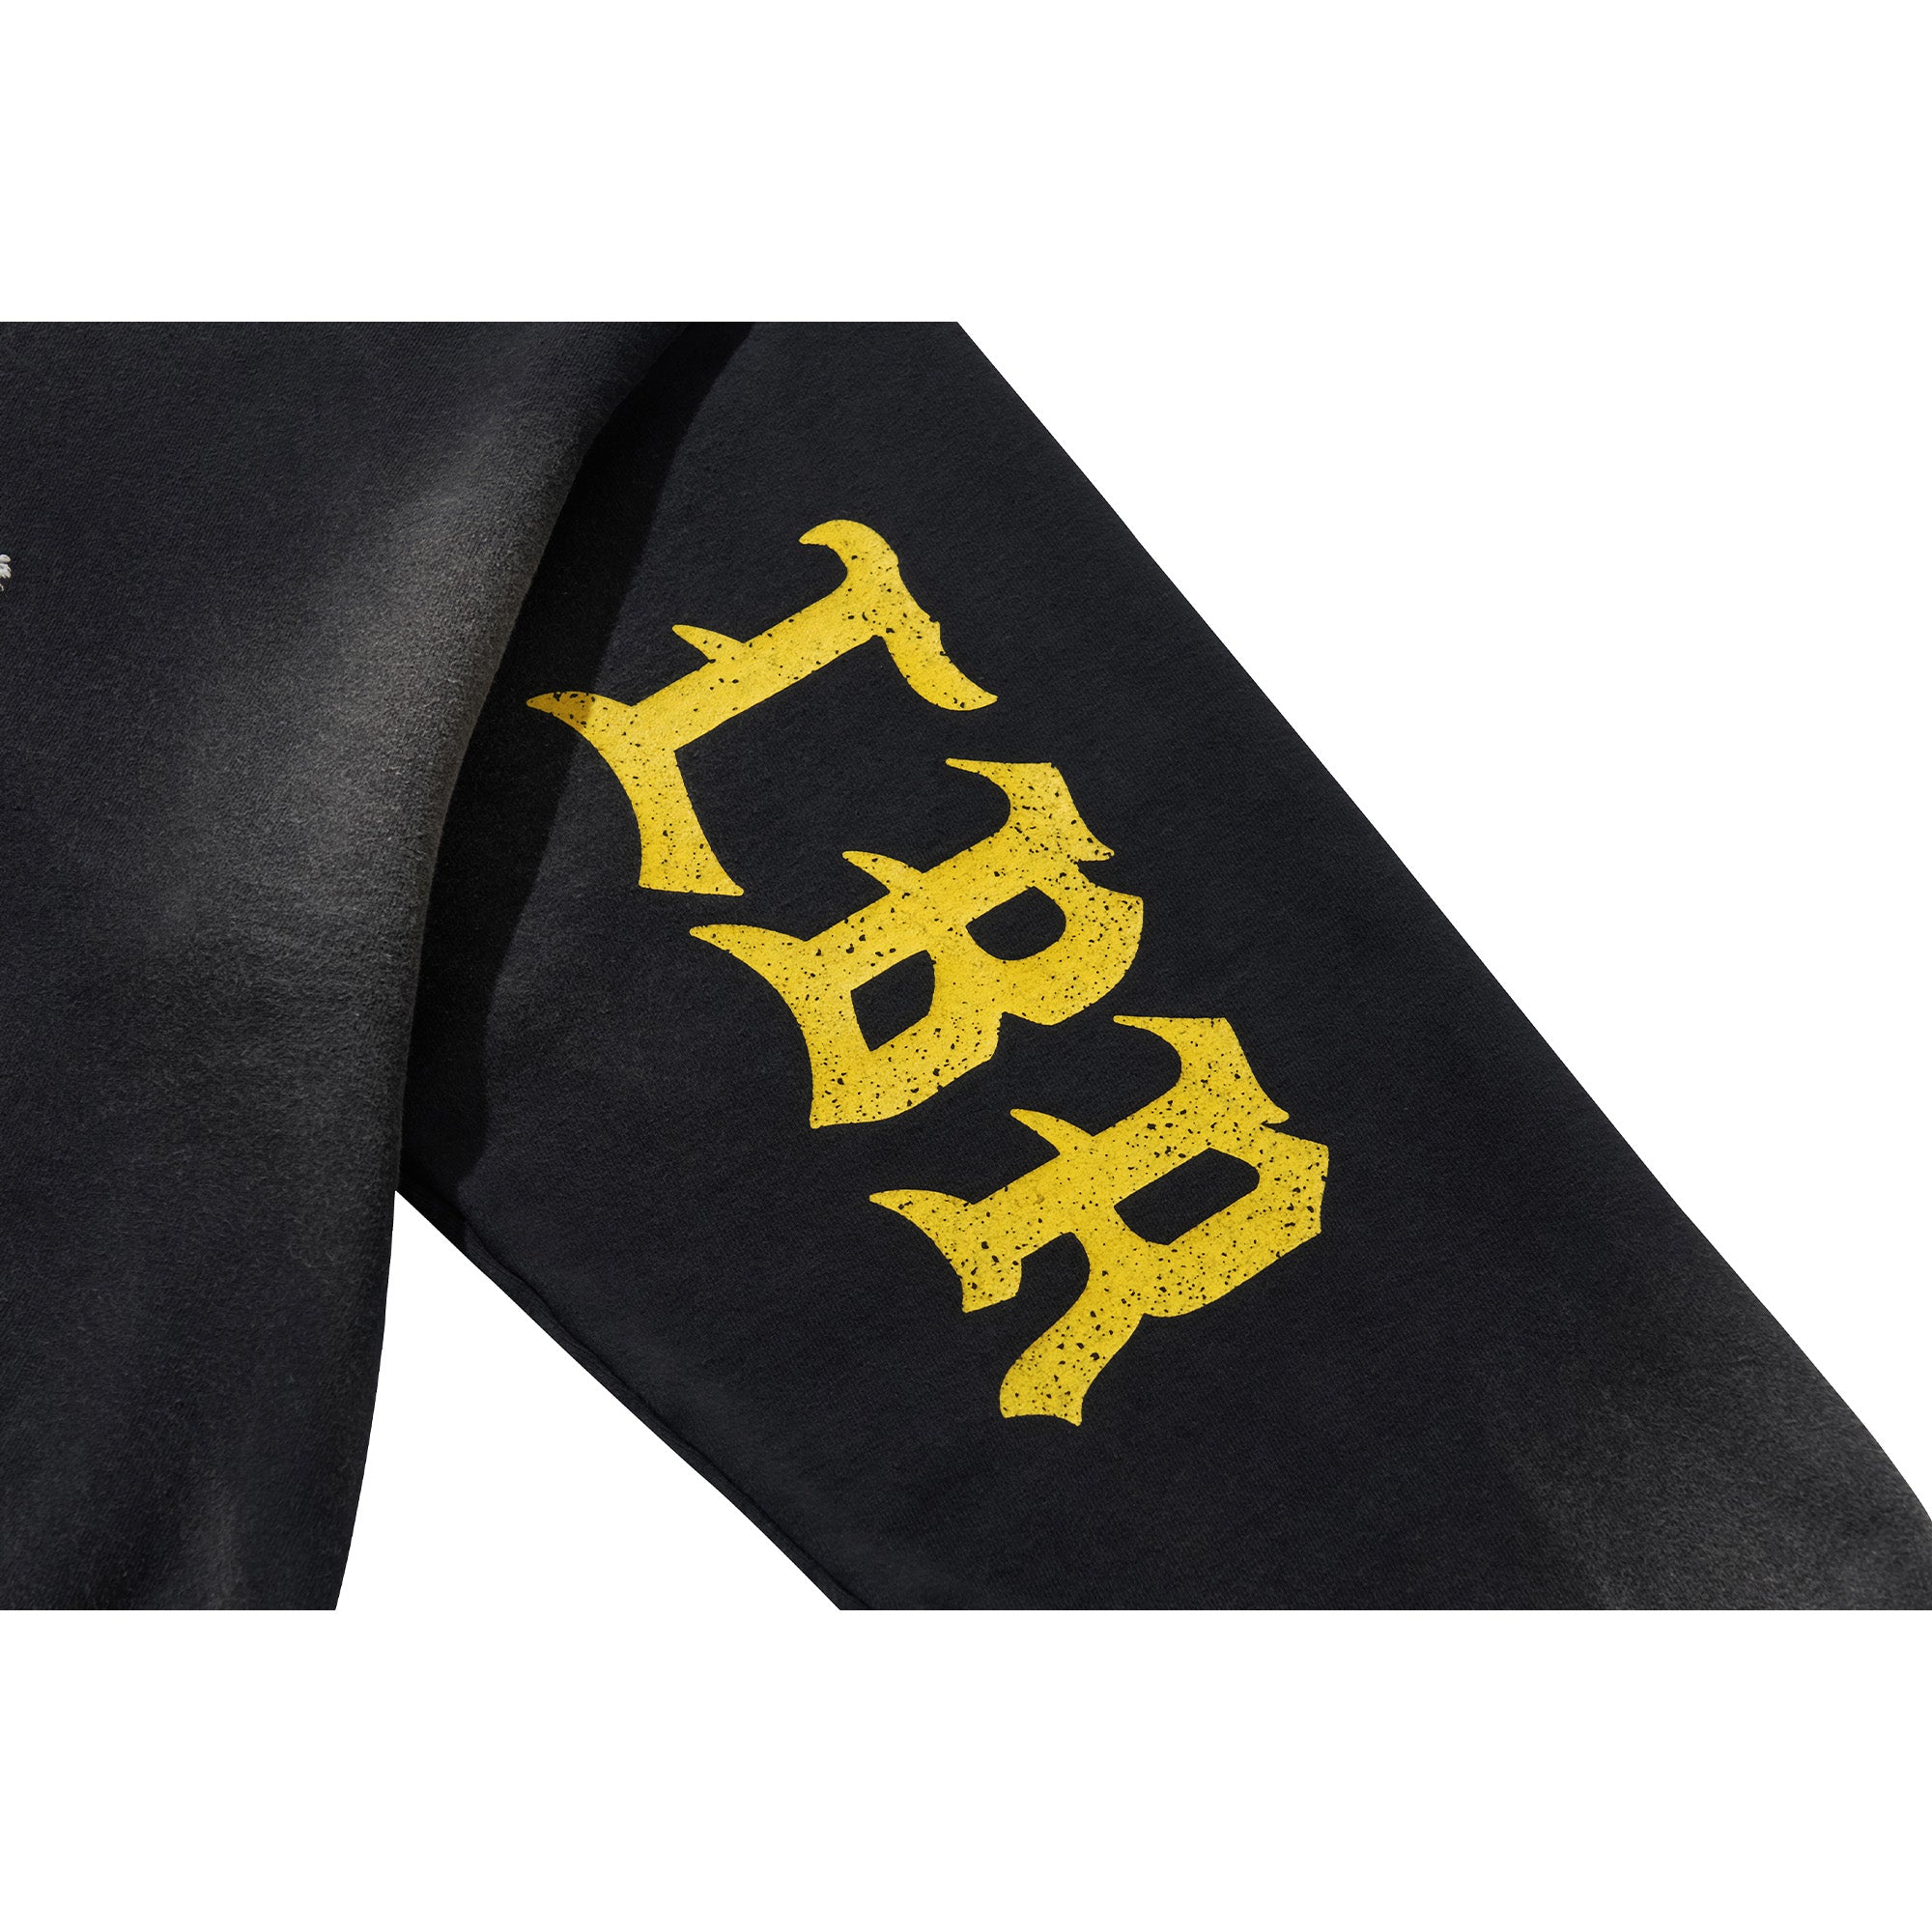 WDS X LIBERE PULLOVER HOODIE / BLACK